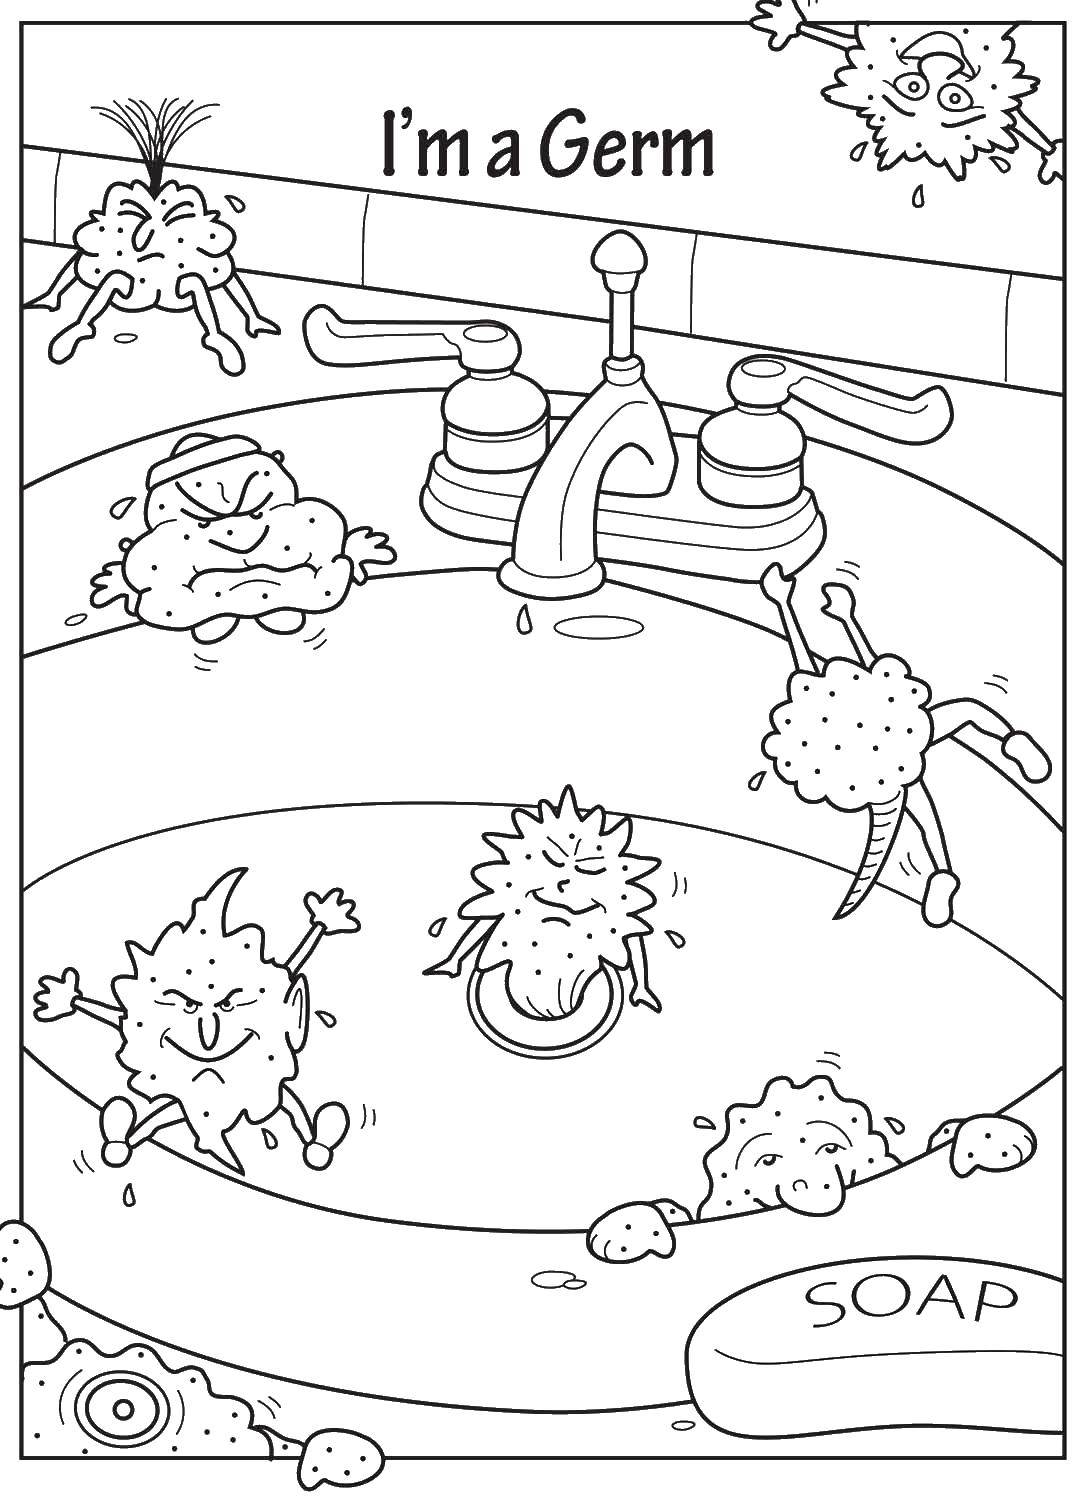 Coloring I microbe. Category coloring. Tags:  germs, bacteria, sink.